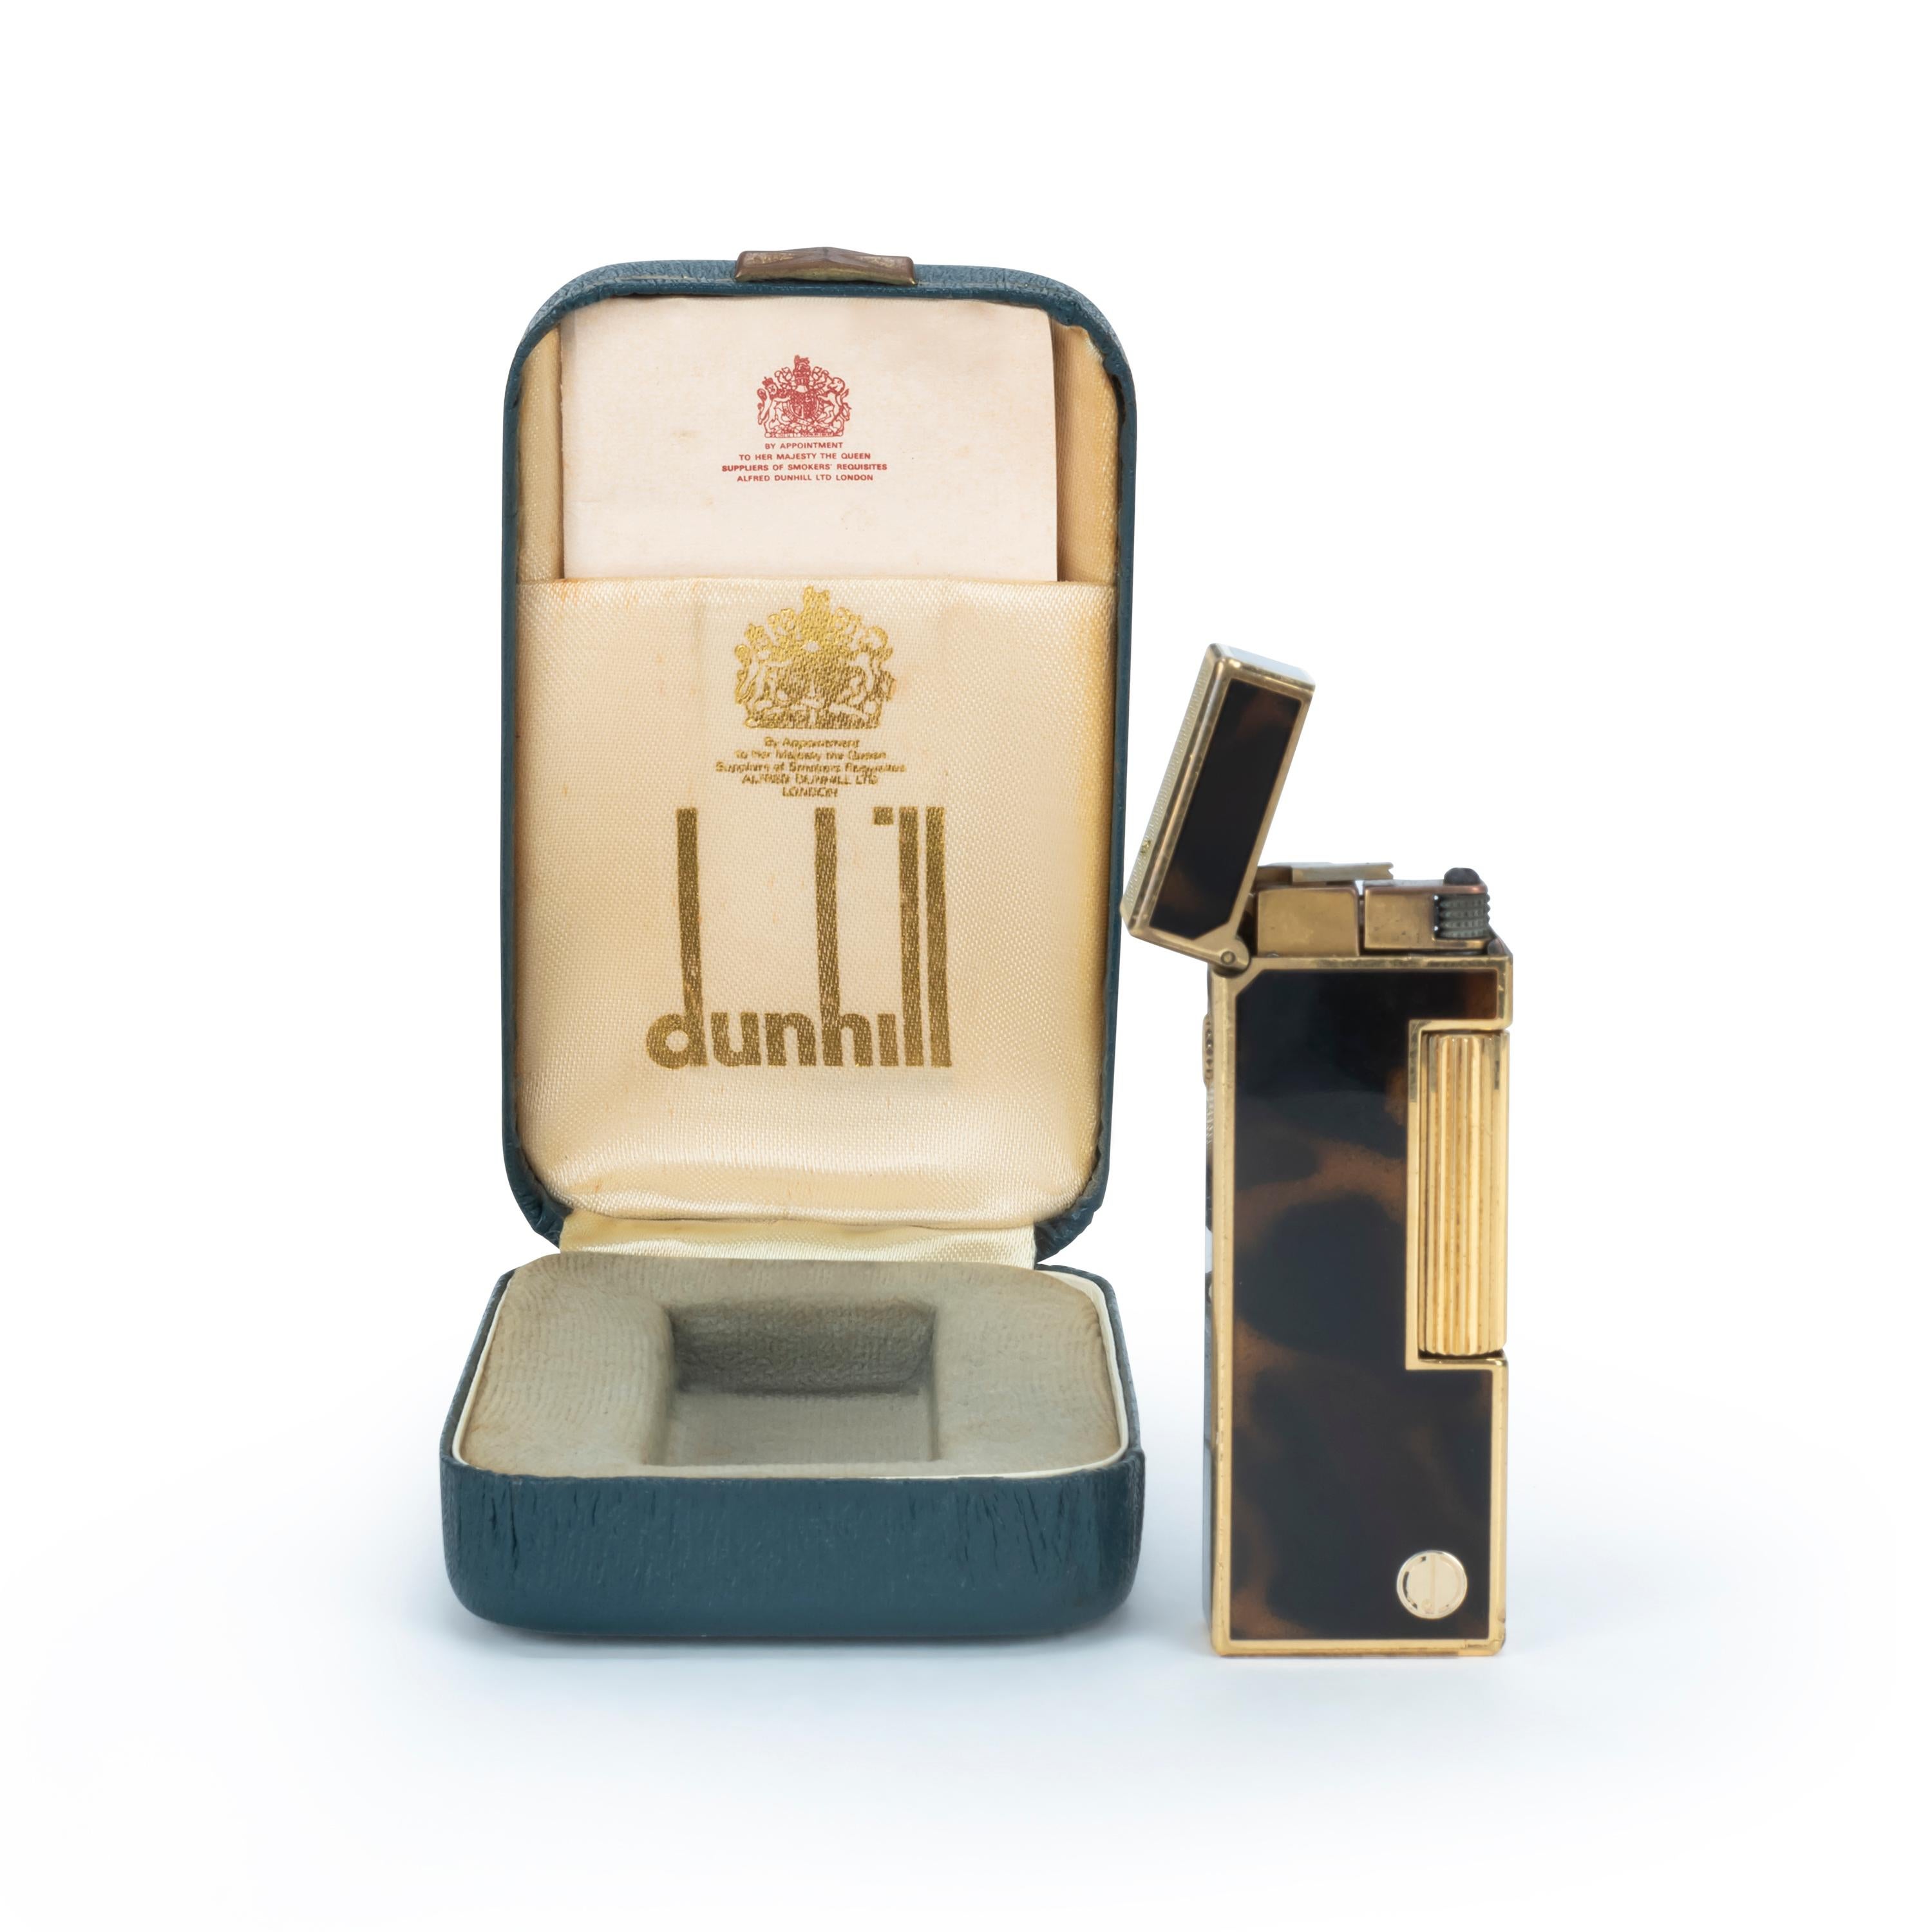 Rare Iconic Vintage and Elegant Dunhill Gold Plated and Dark Cognac Lacquer Swiss Made Lighter
Rare Vintage Dunhill gold plated and Cognac lacquer Swiss Made lighter In mint condition.
Works perfectly. 
Iconic and beautifully engineered piece with